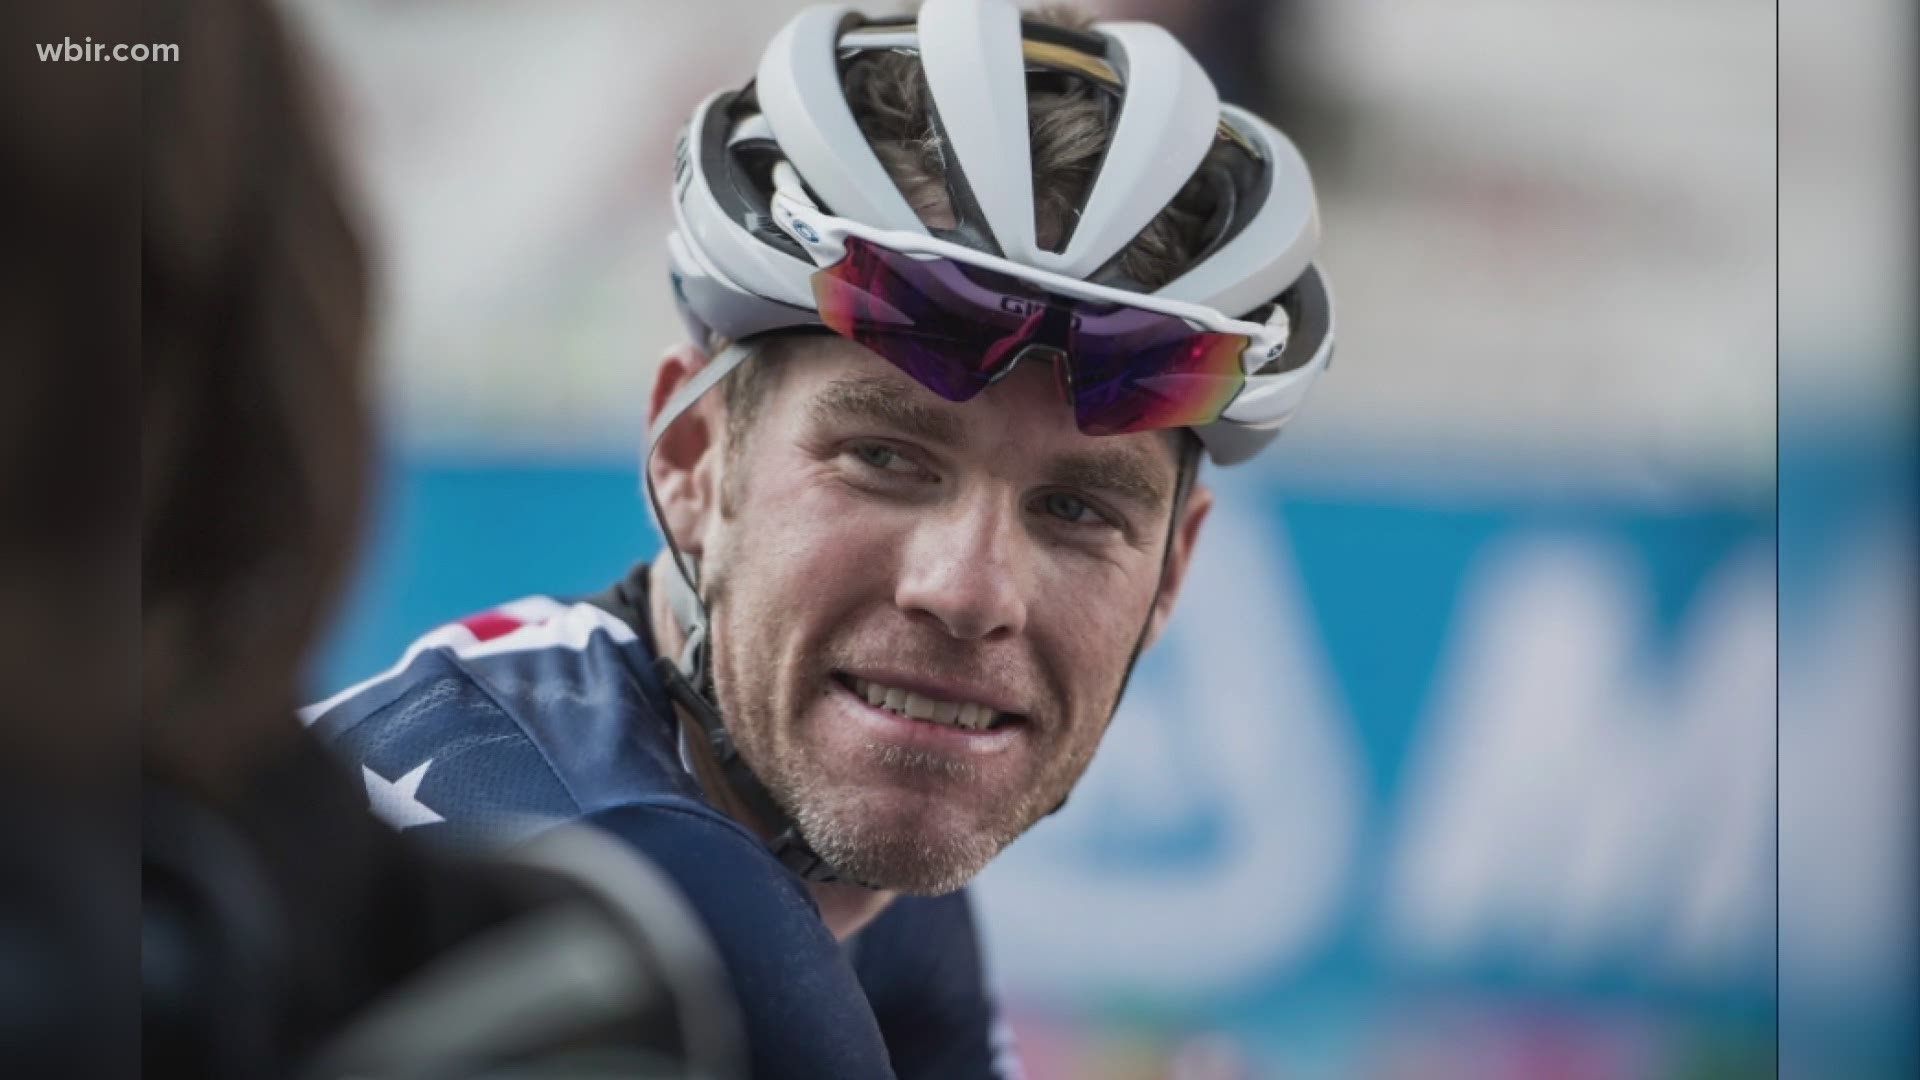 Brent Bookwalter will ride in the US Cycling Championships and said he plans to retire at the end of the 2021 season.